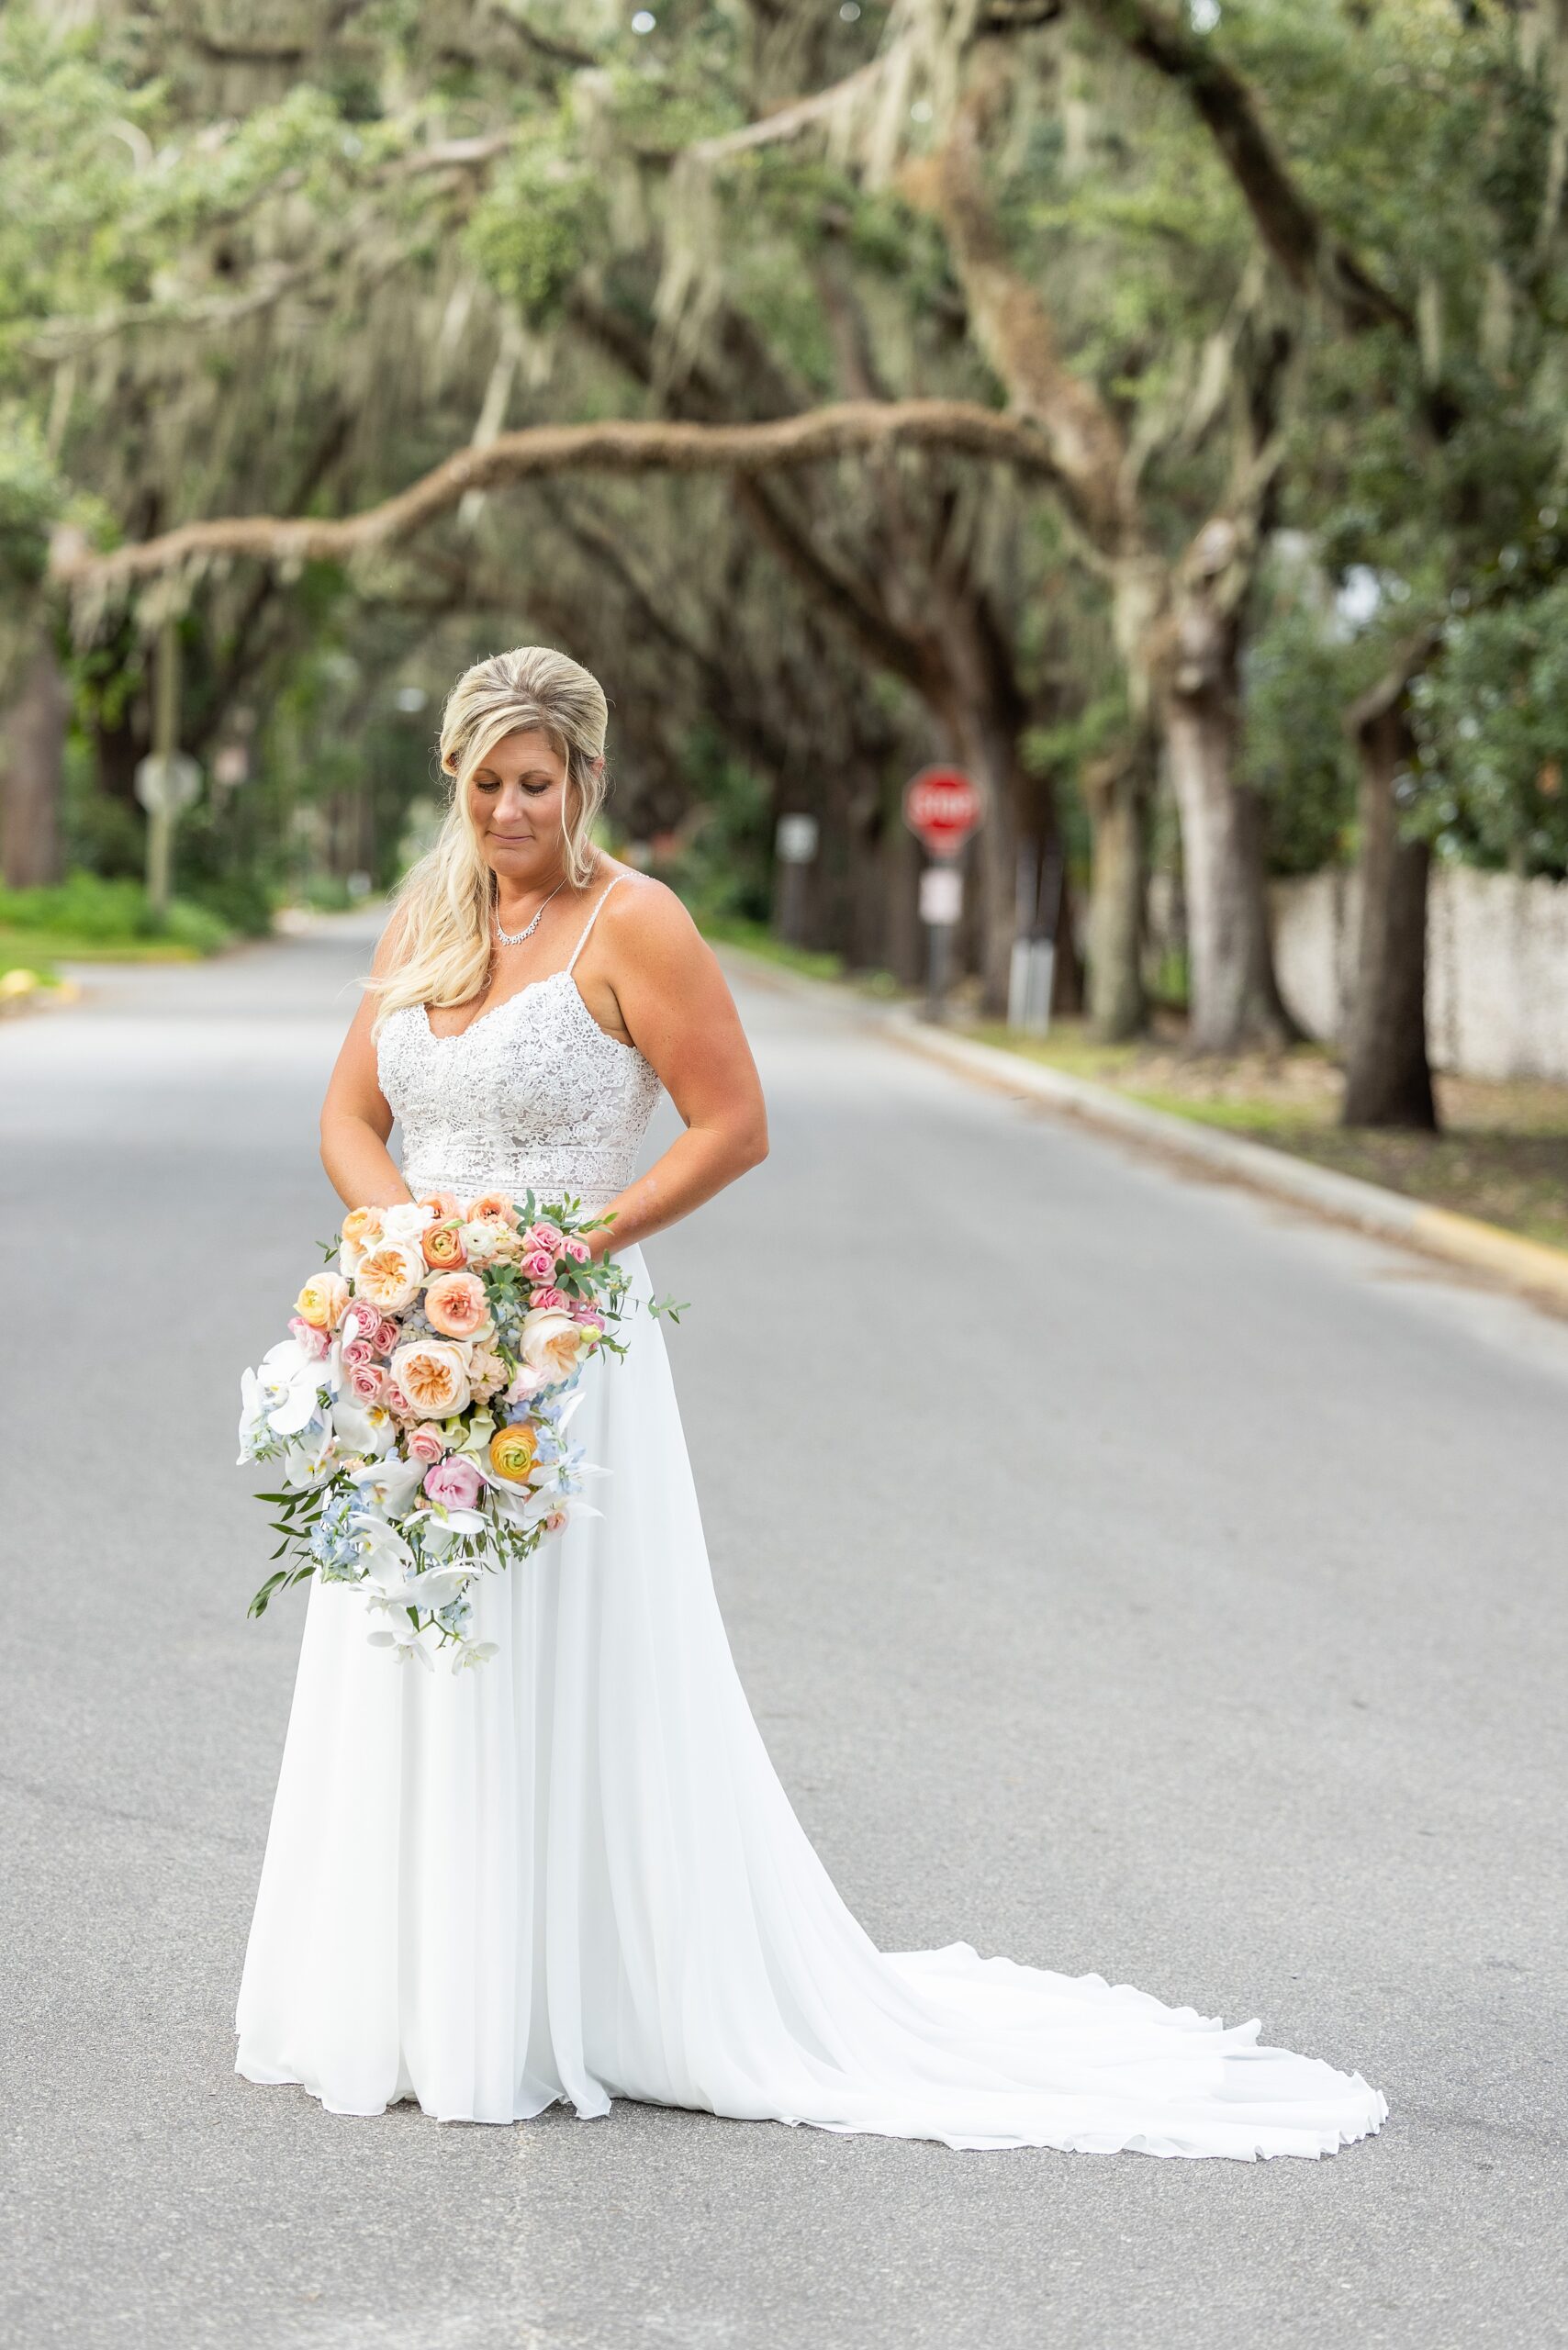 A bride smiles down at her colorful bouquet while standing in a street lined with oak trees at her fountain of youth wedding